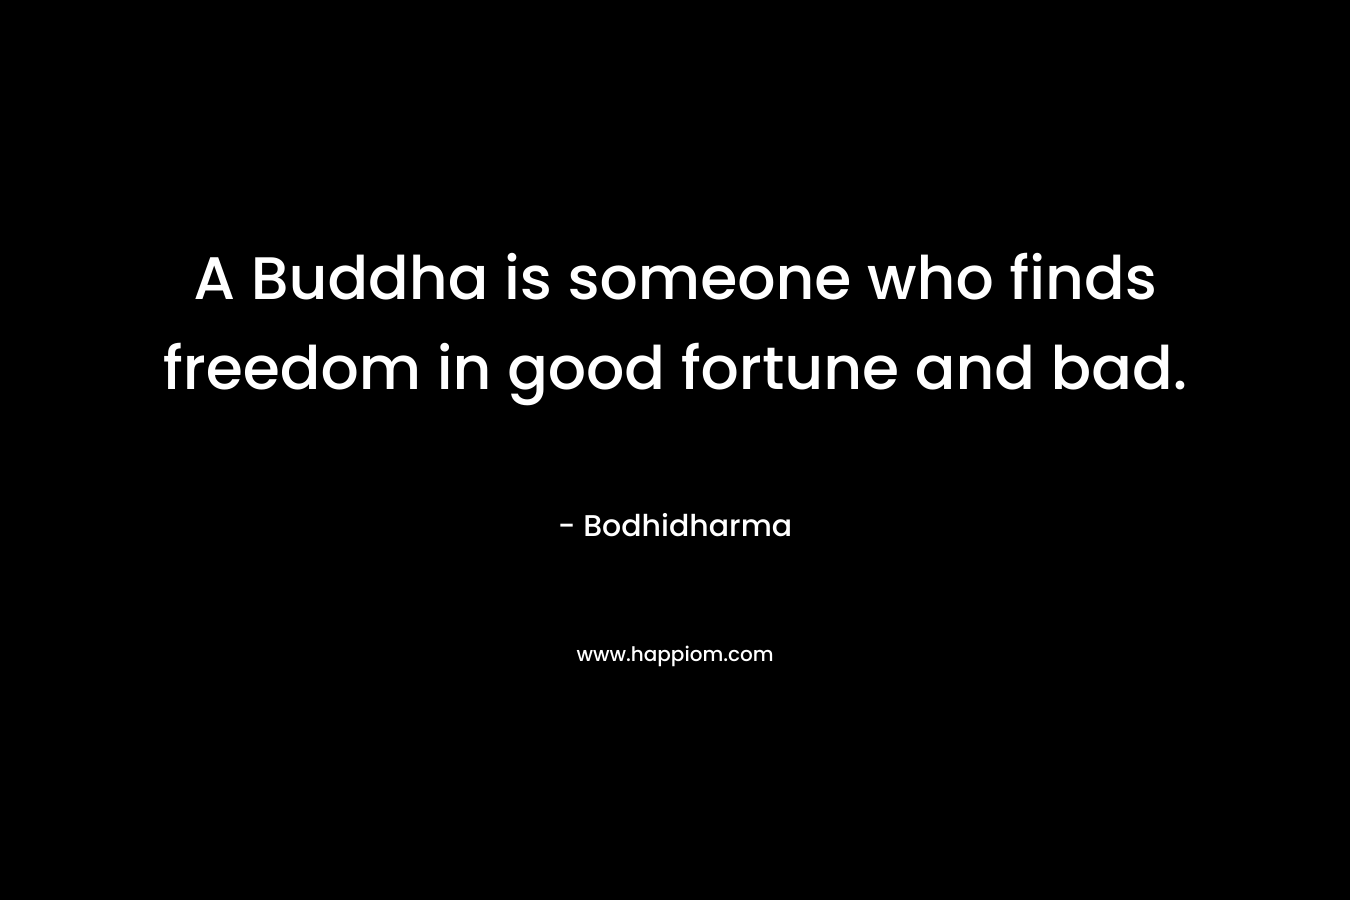 A Buddha is someone who finds freedom in good fortune and bad. – Bodhidharma